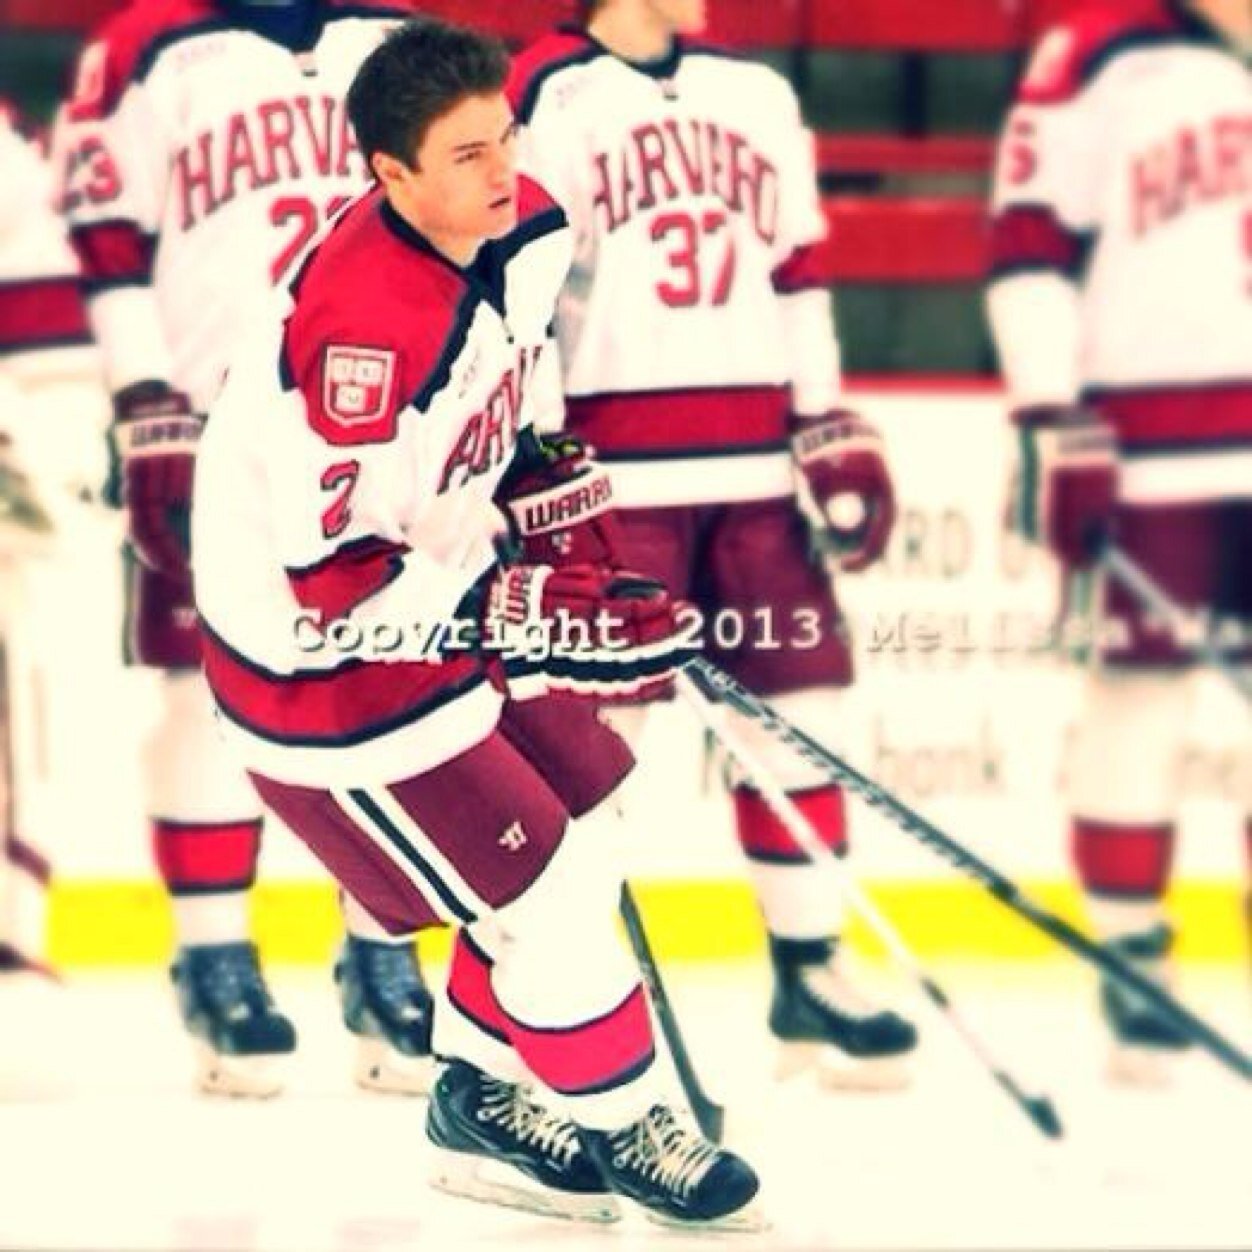 Confidence comes not from always being right, but from not fearing to be wrong - Harvard Hockey - Genève-Servette HC